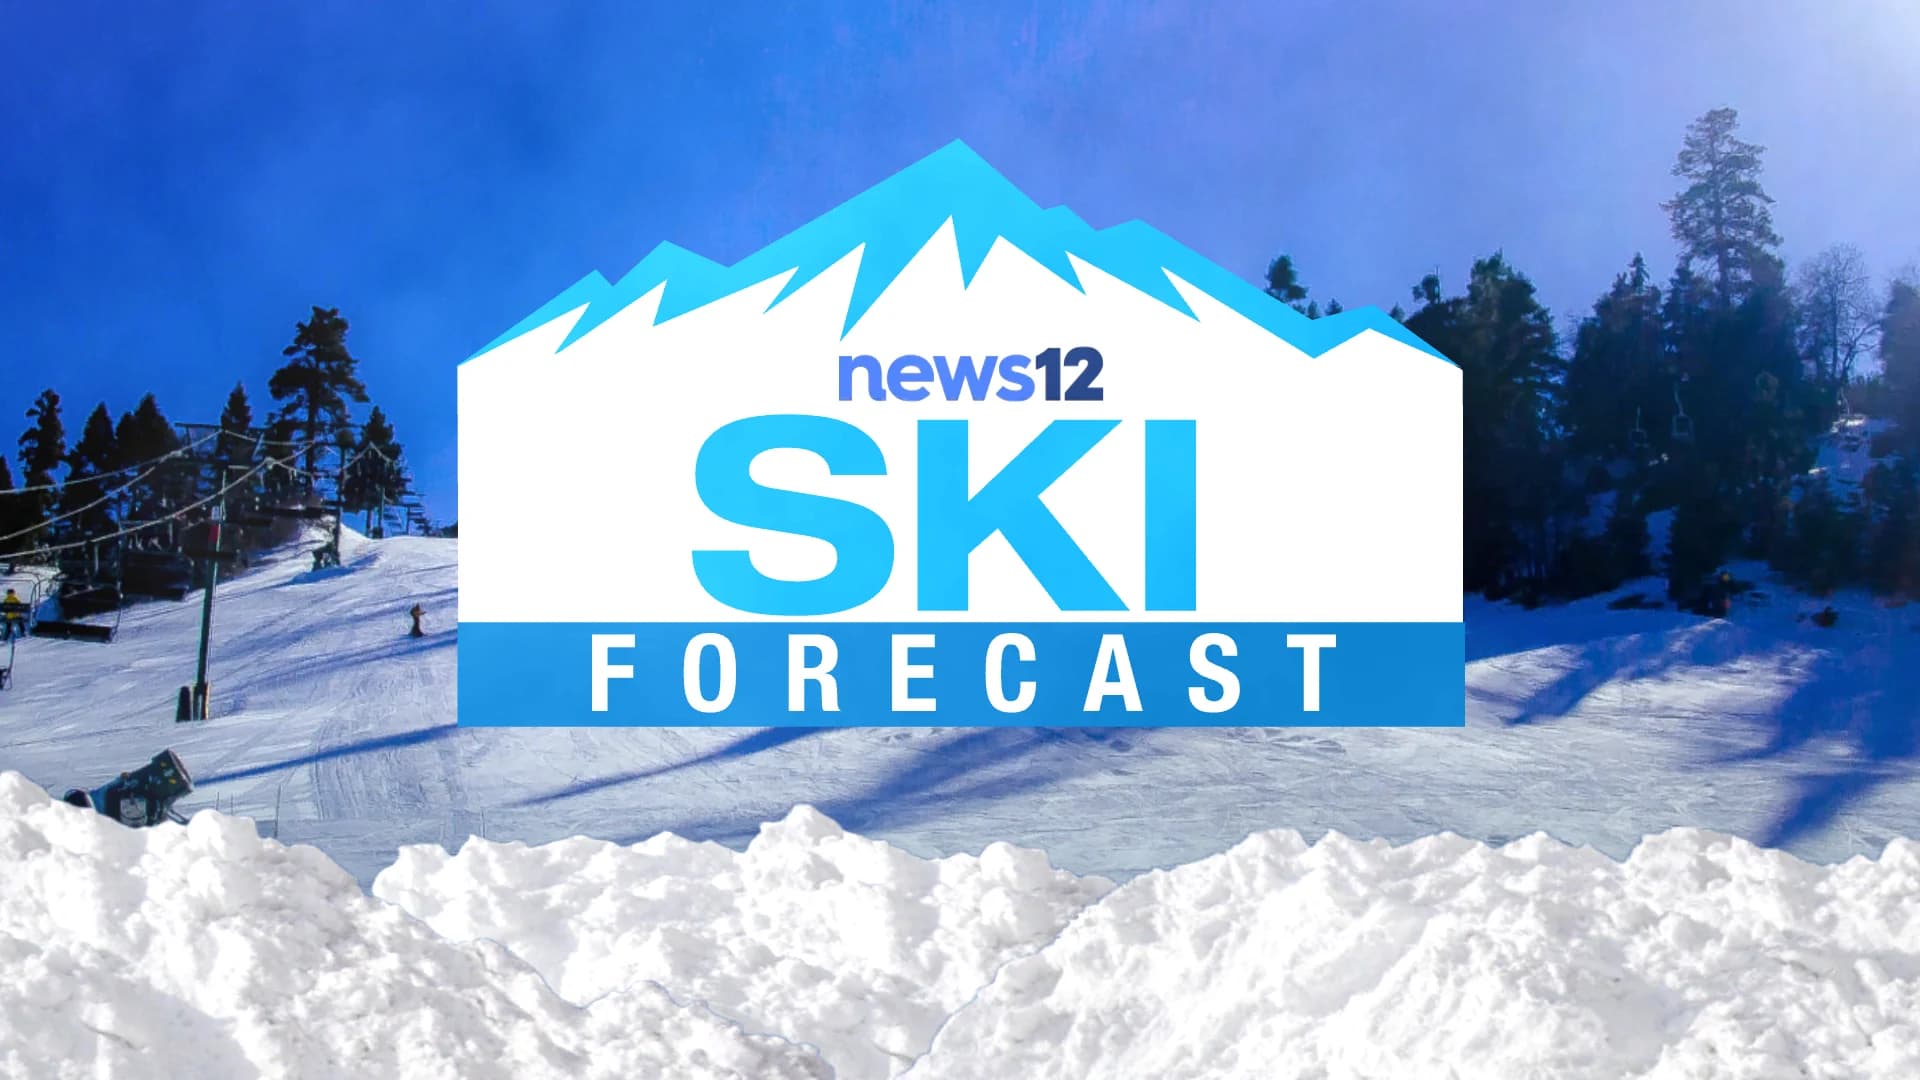 New Jersey Ski Report Sweepstakes: Enter to win a pair of skis!